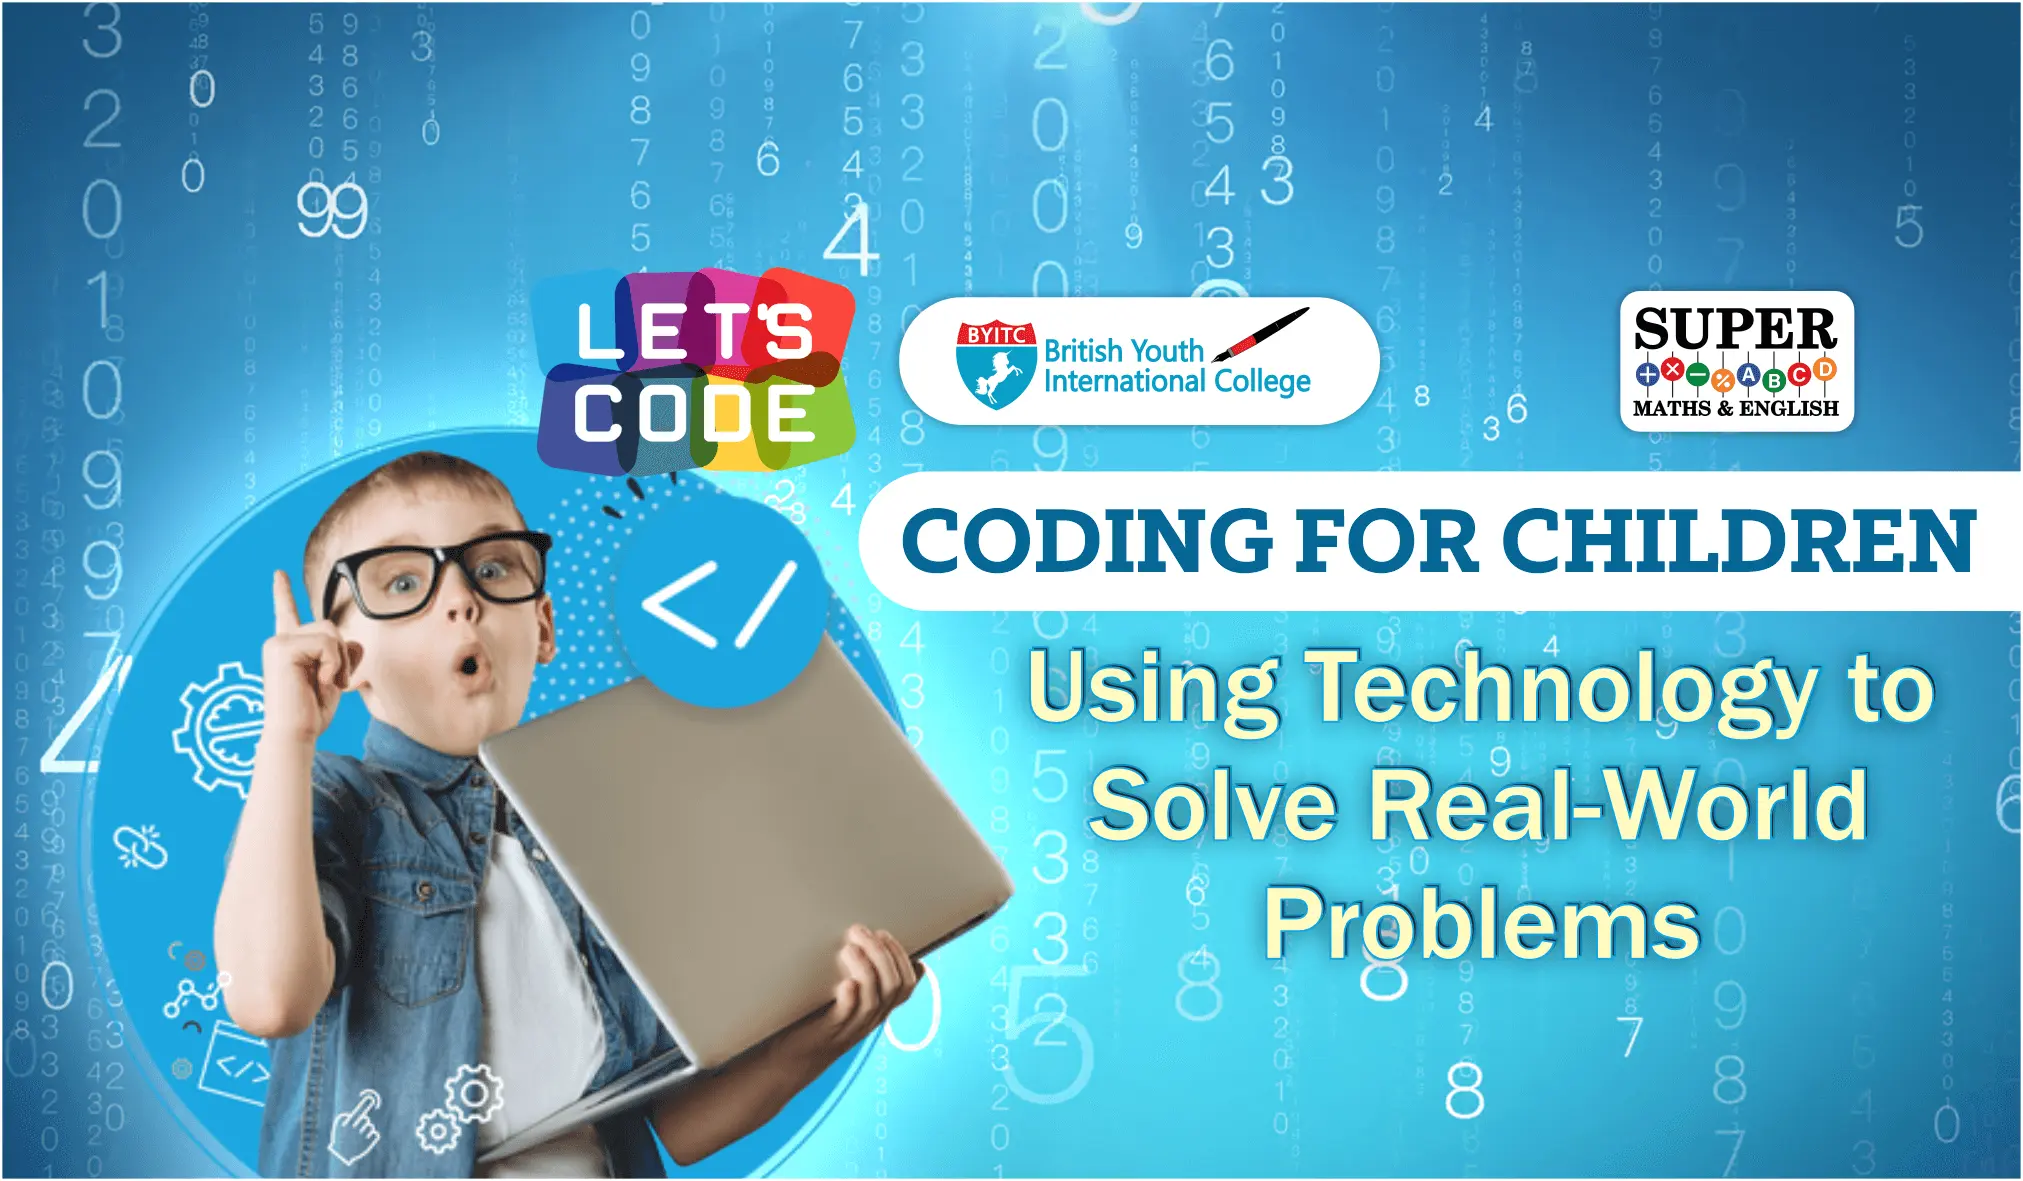 Coding for Children: Using Technology to Solve Real-World Problems